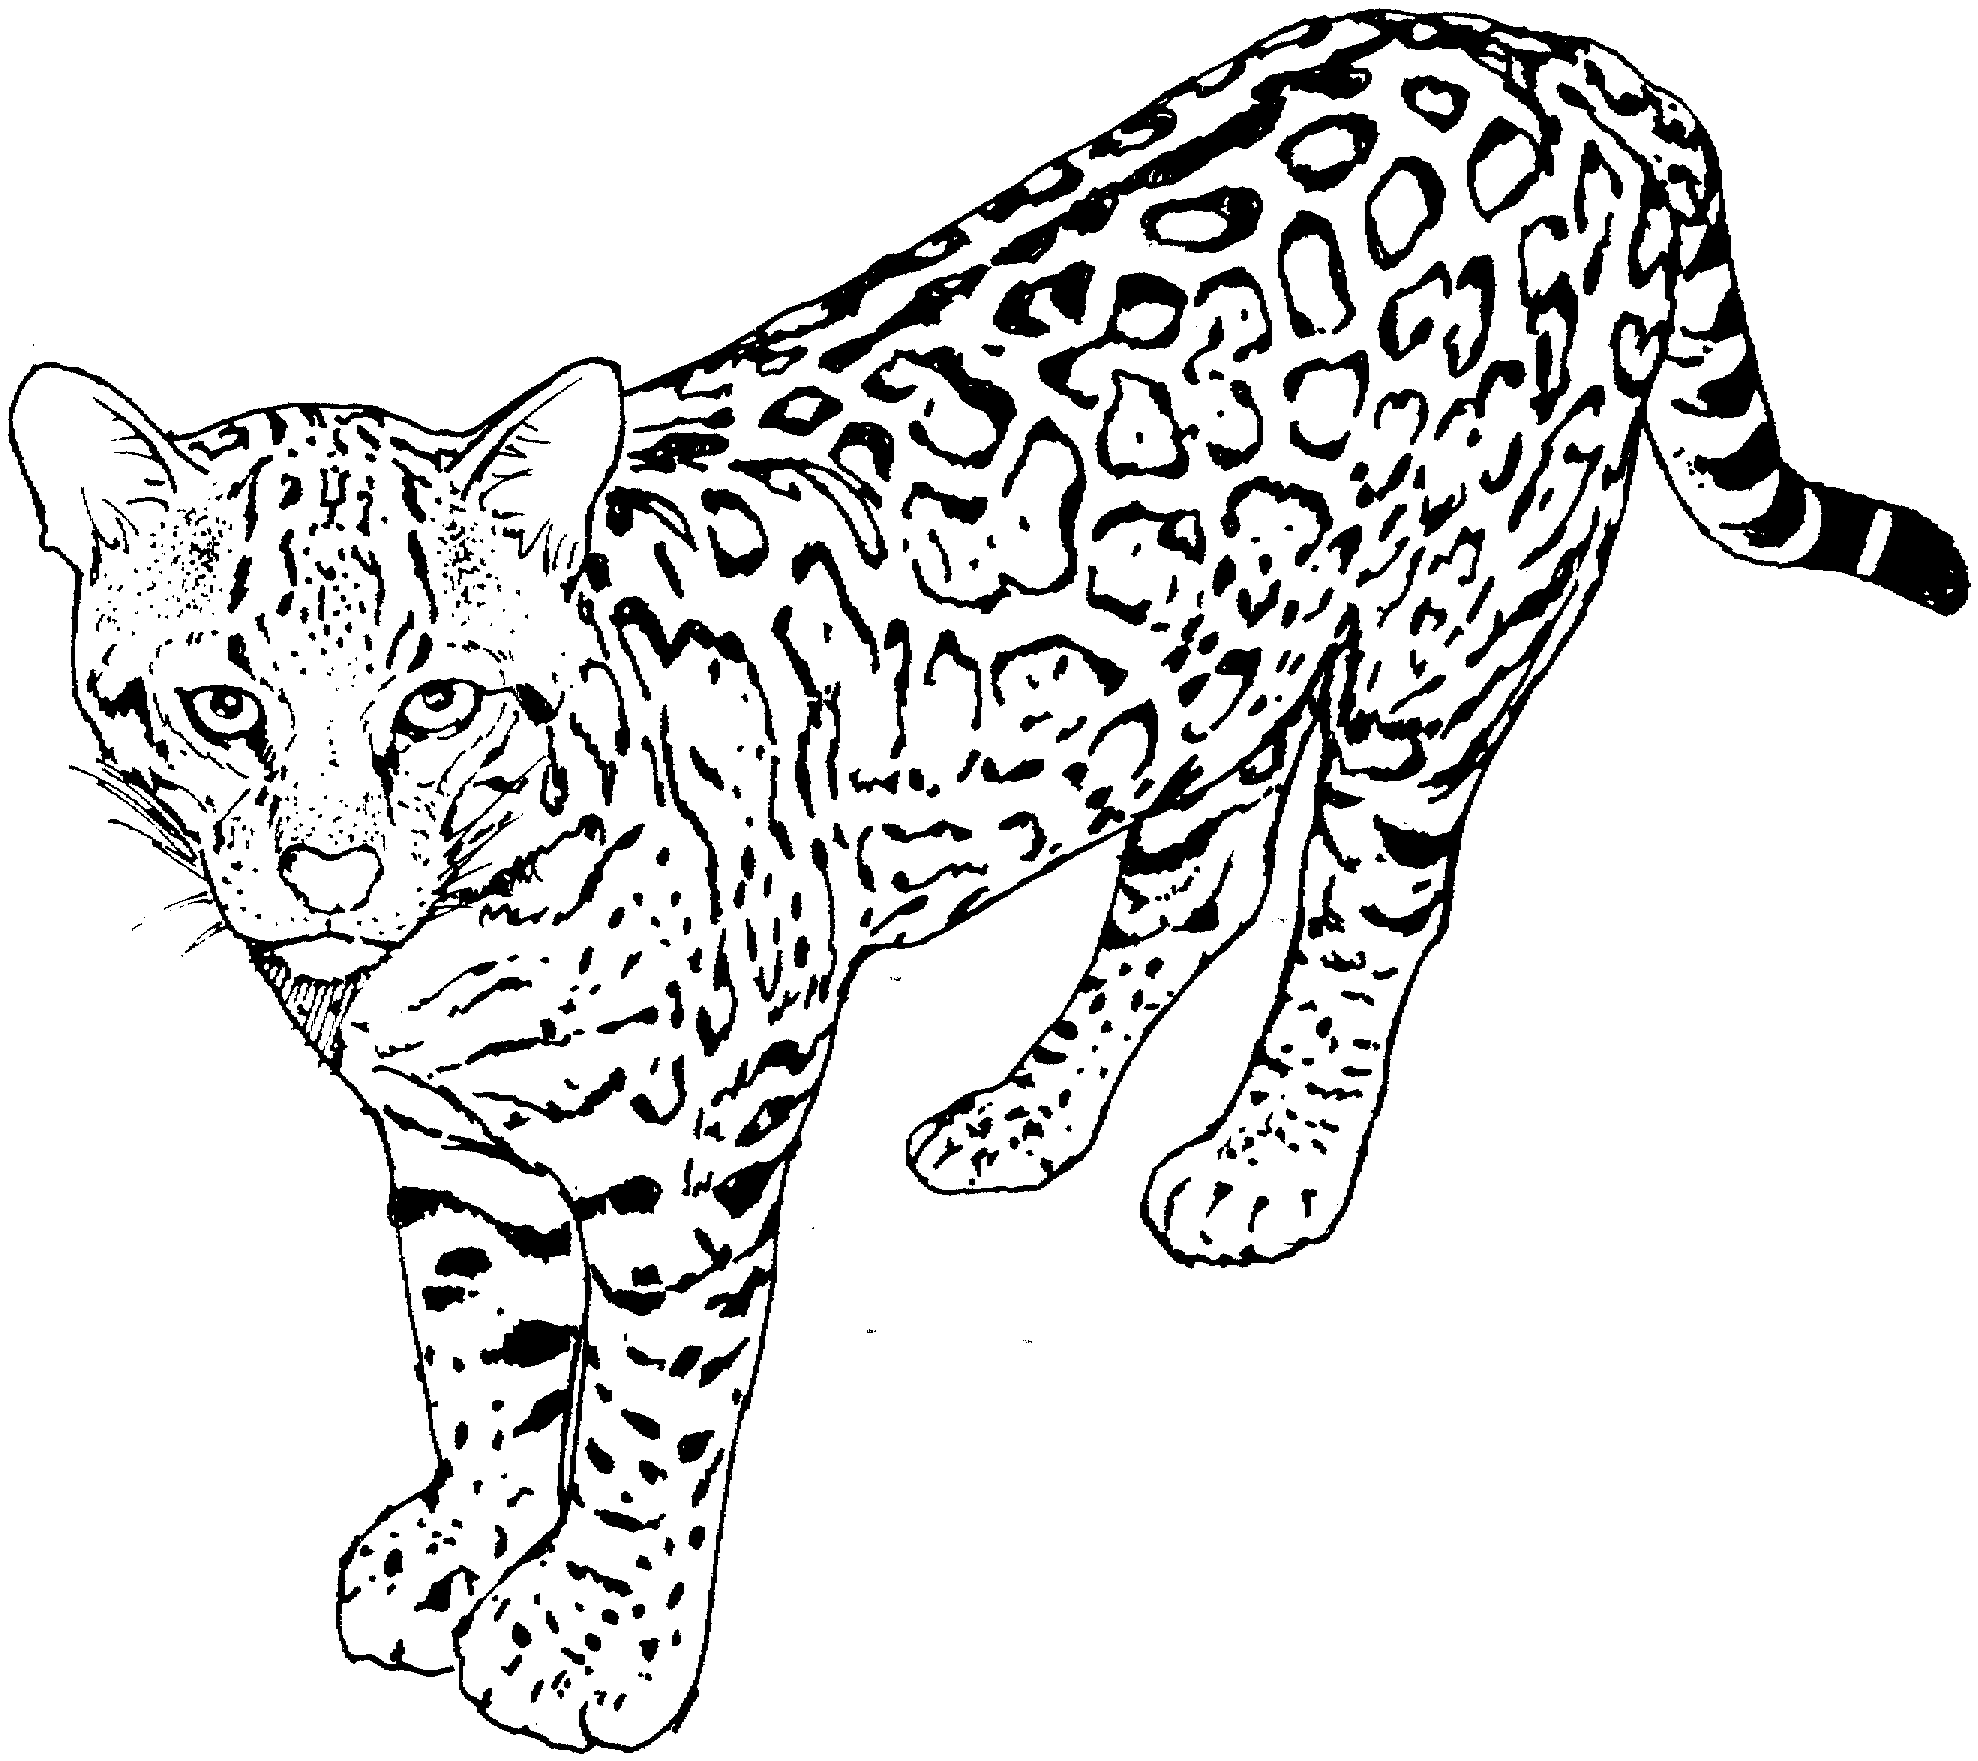 Cat Coloring Pages | Cats Coloring pages |Kitten Coloring pages | Cool cats | #33